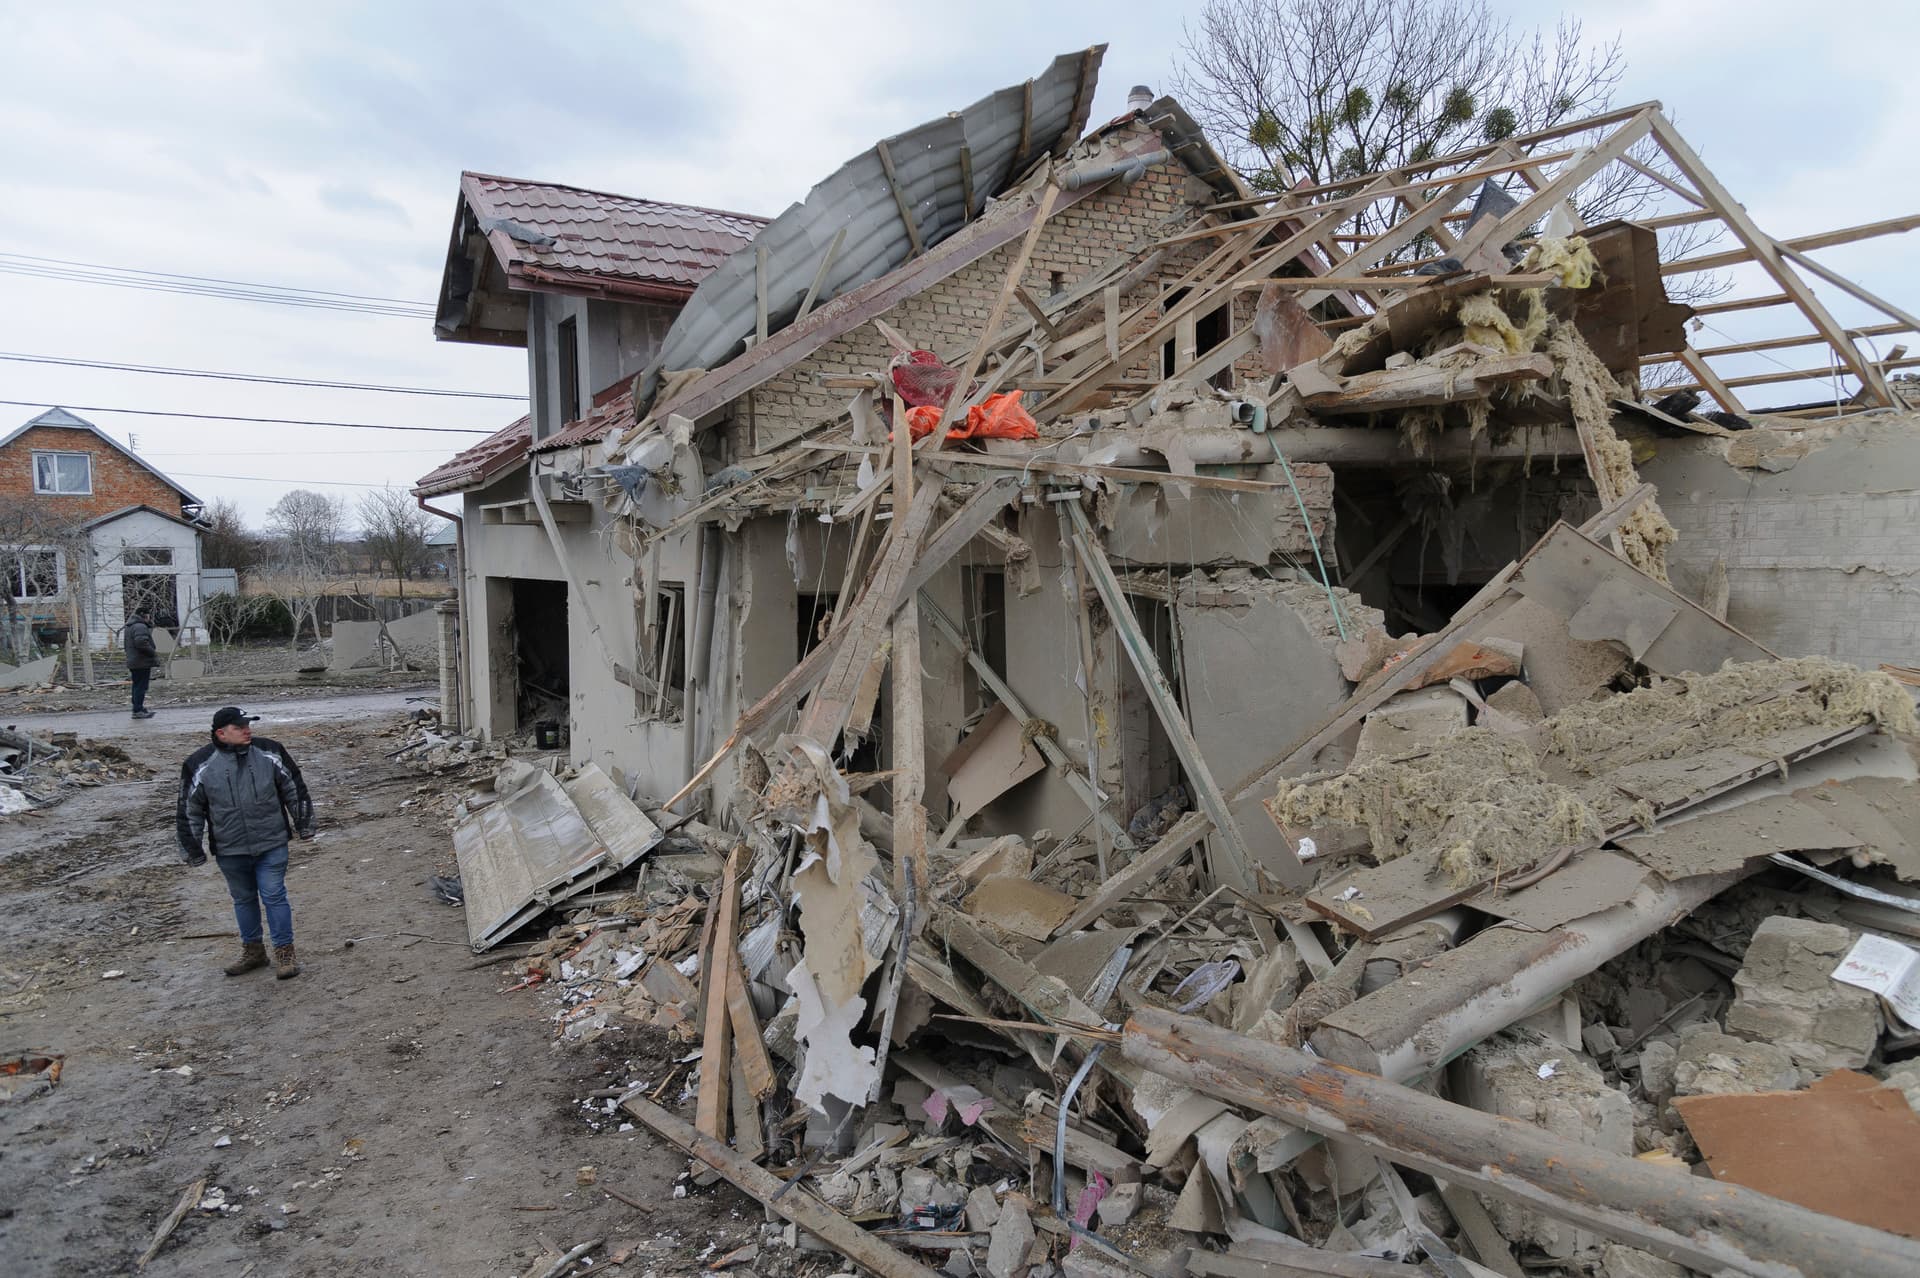 Villagers clear the rubble after Russia's night rocket attack ruined private houses in a village, in Zolochevsky district